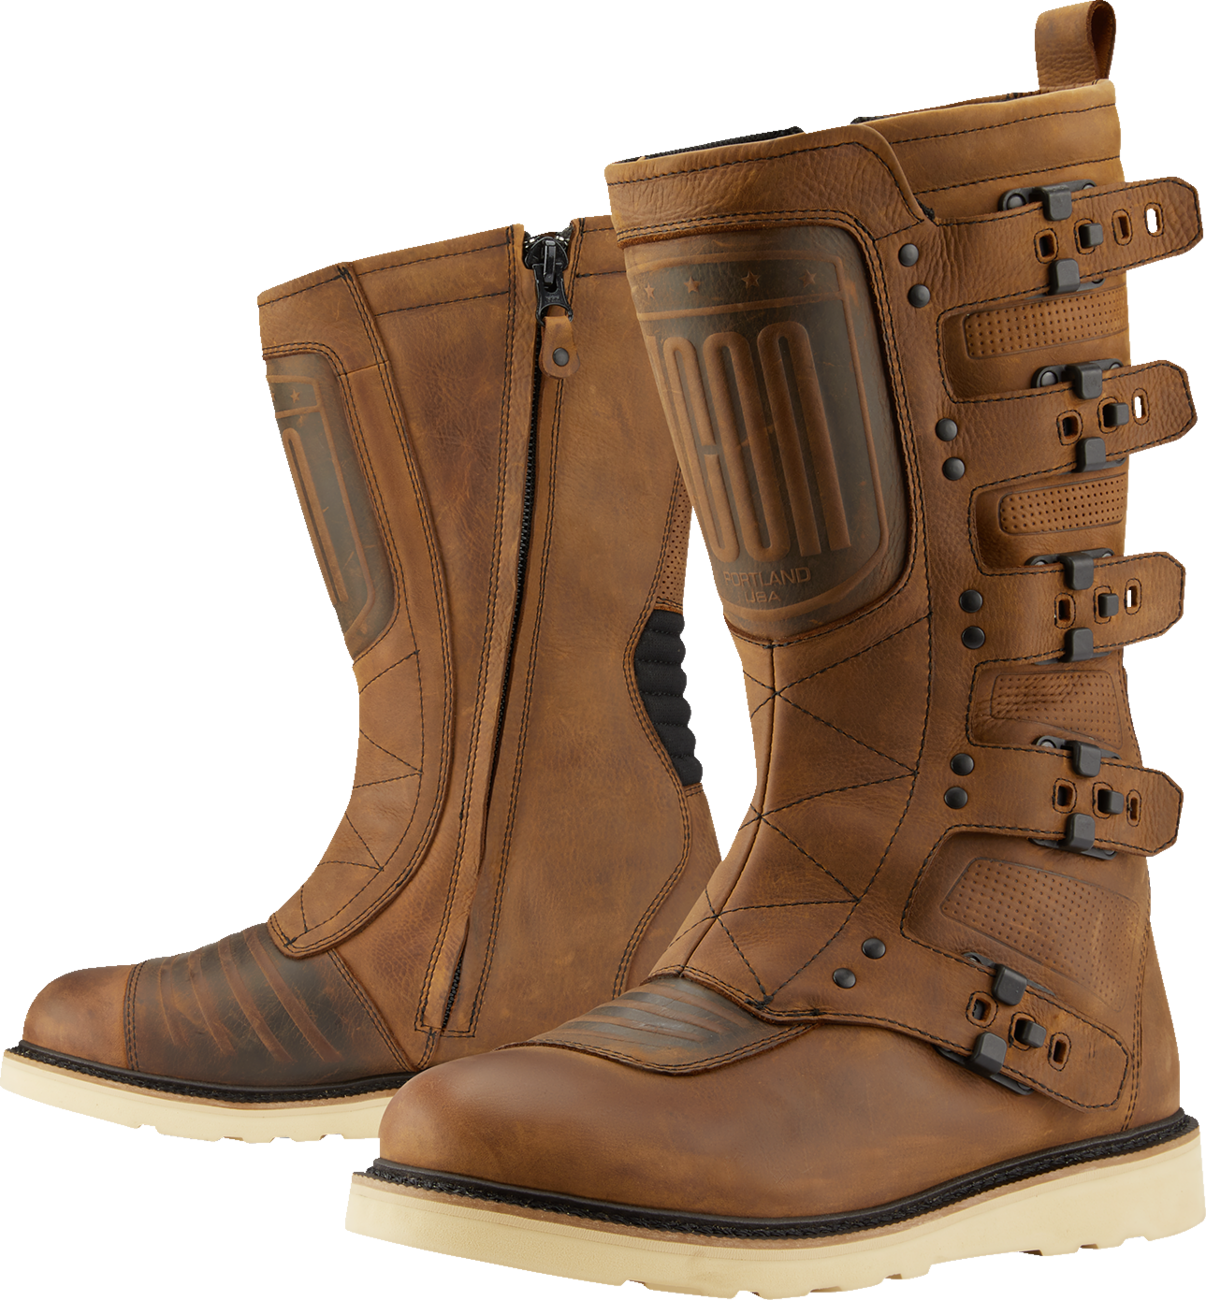 ICON Elsinore 2™ CE Boots - Brown - Size 8 3403-1221